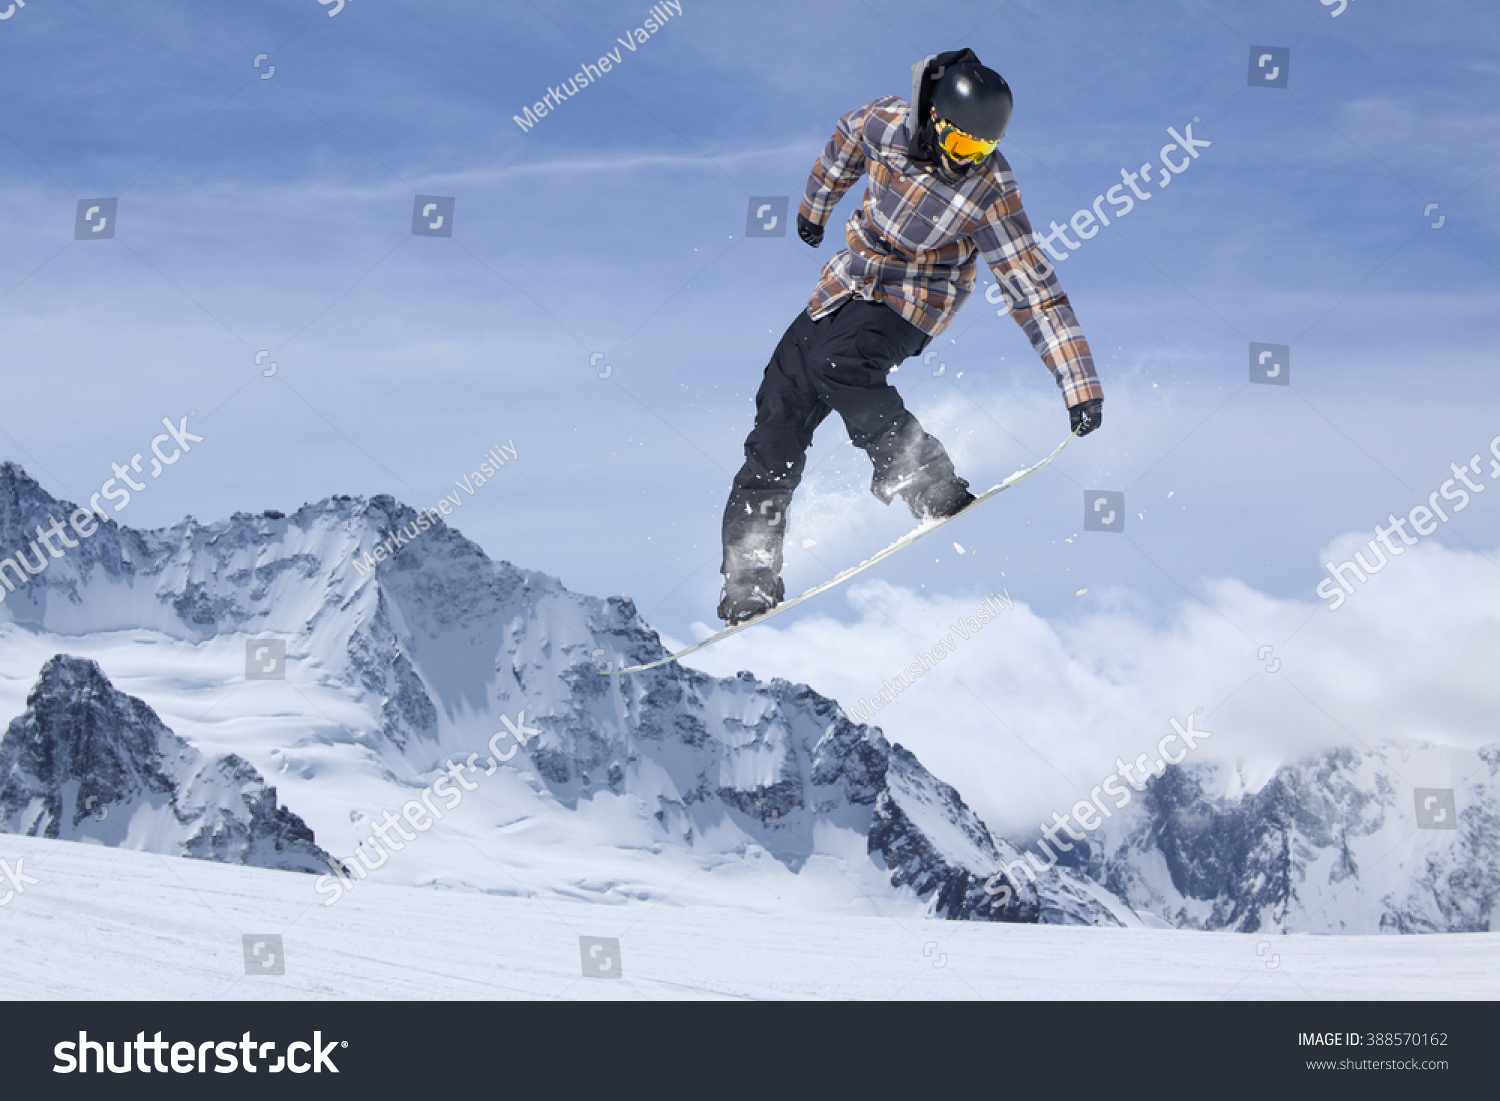 Snowboard jump on mountains. Extreme sport. #388570162